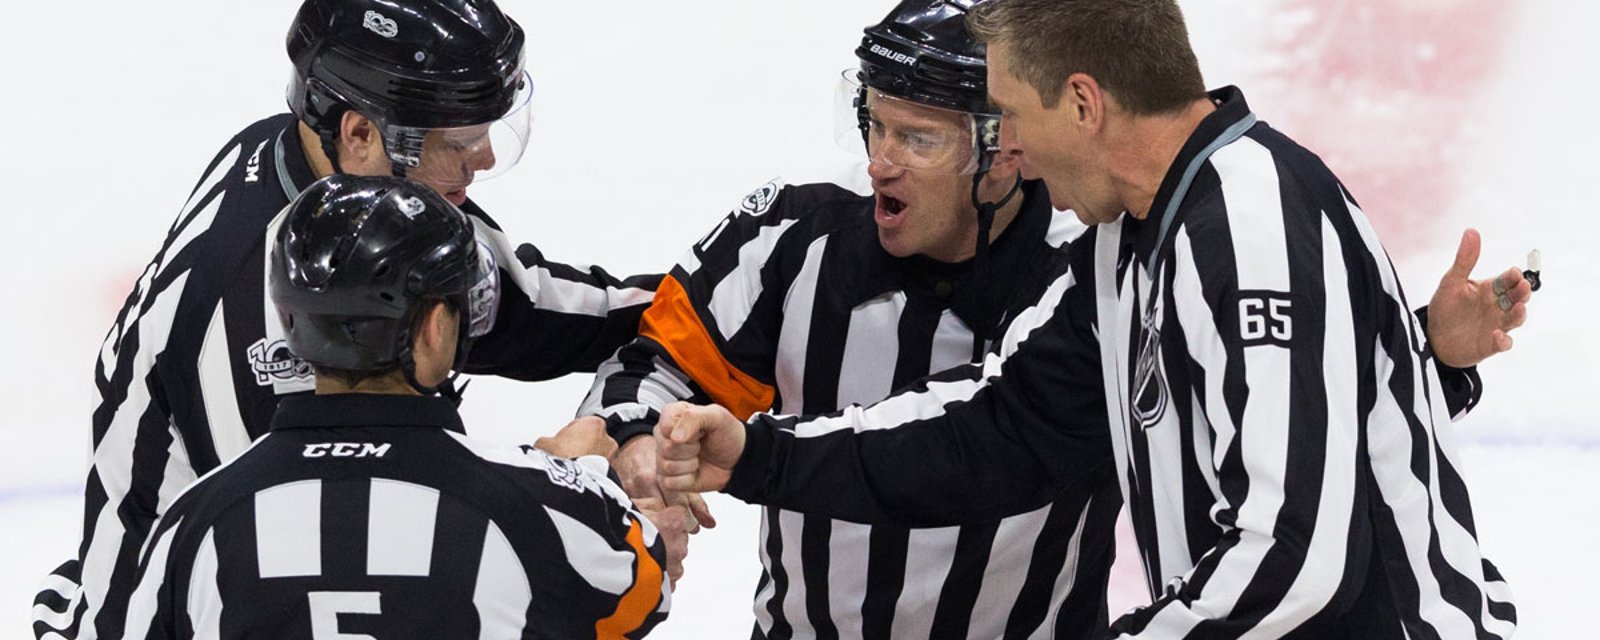 Breaking: NHL referees admit to in-game miscall!